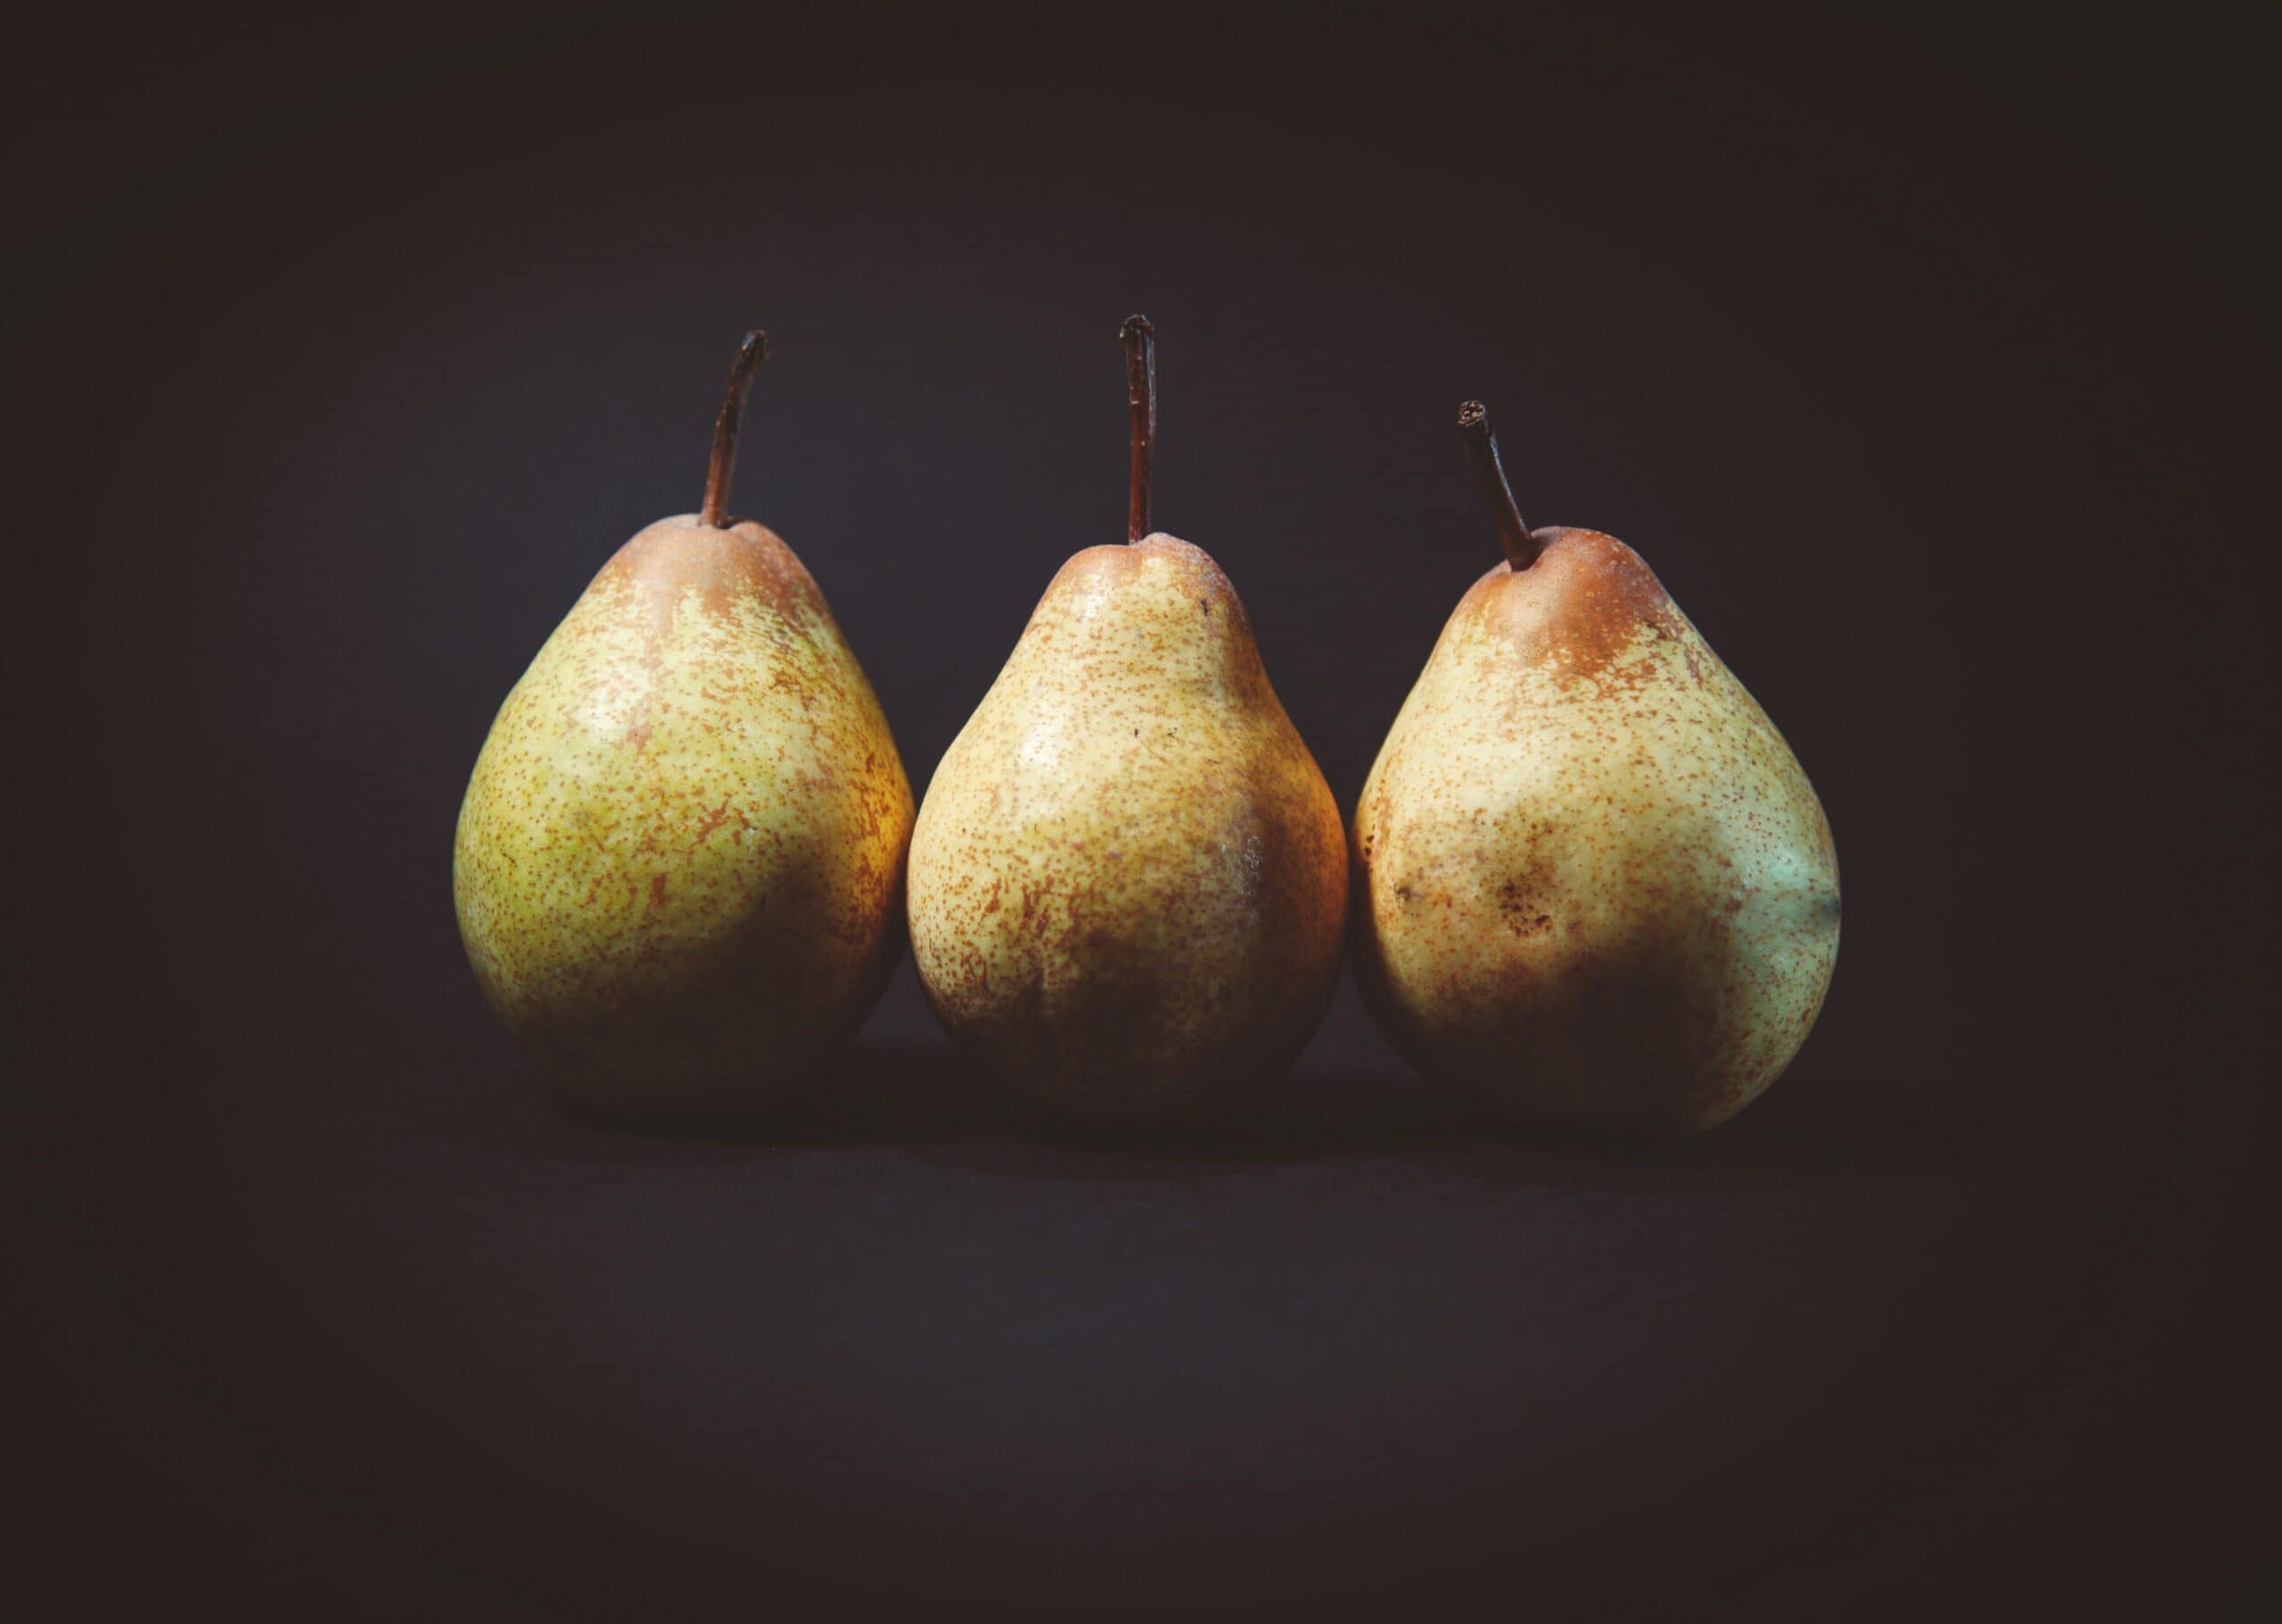 Three pears are sitting in a row on the table.